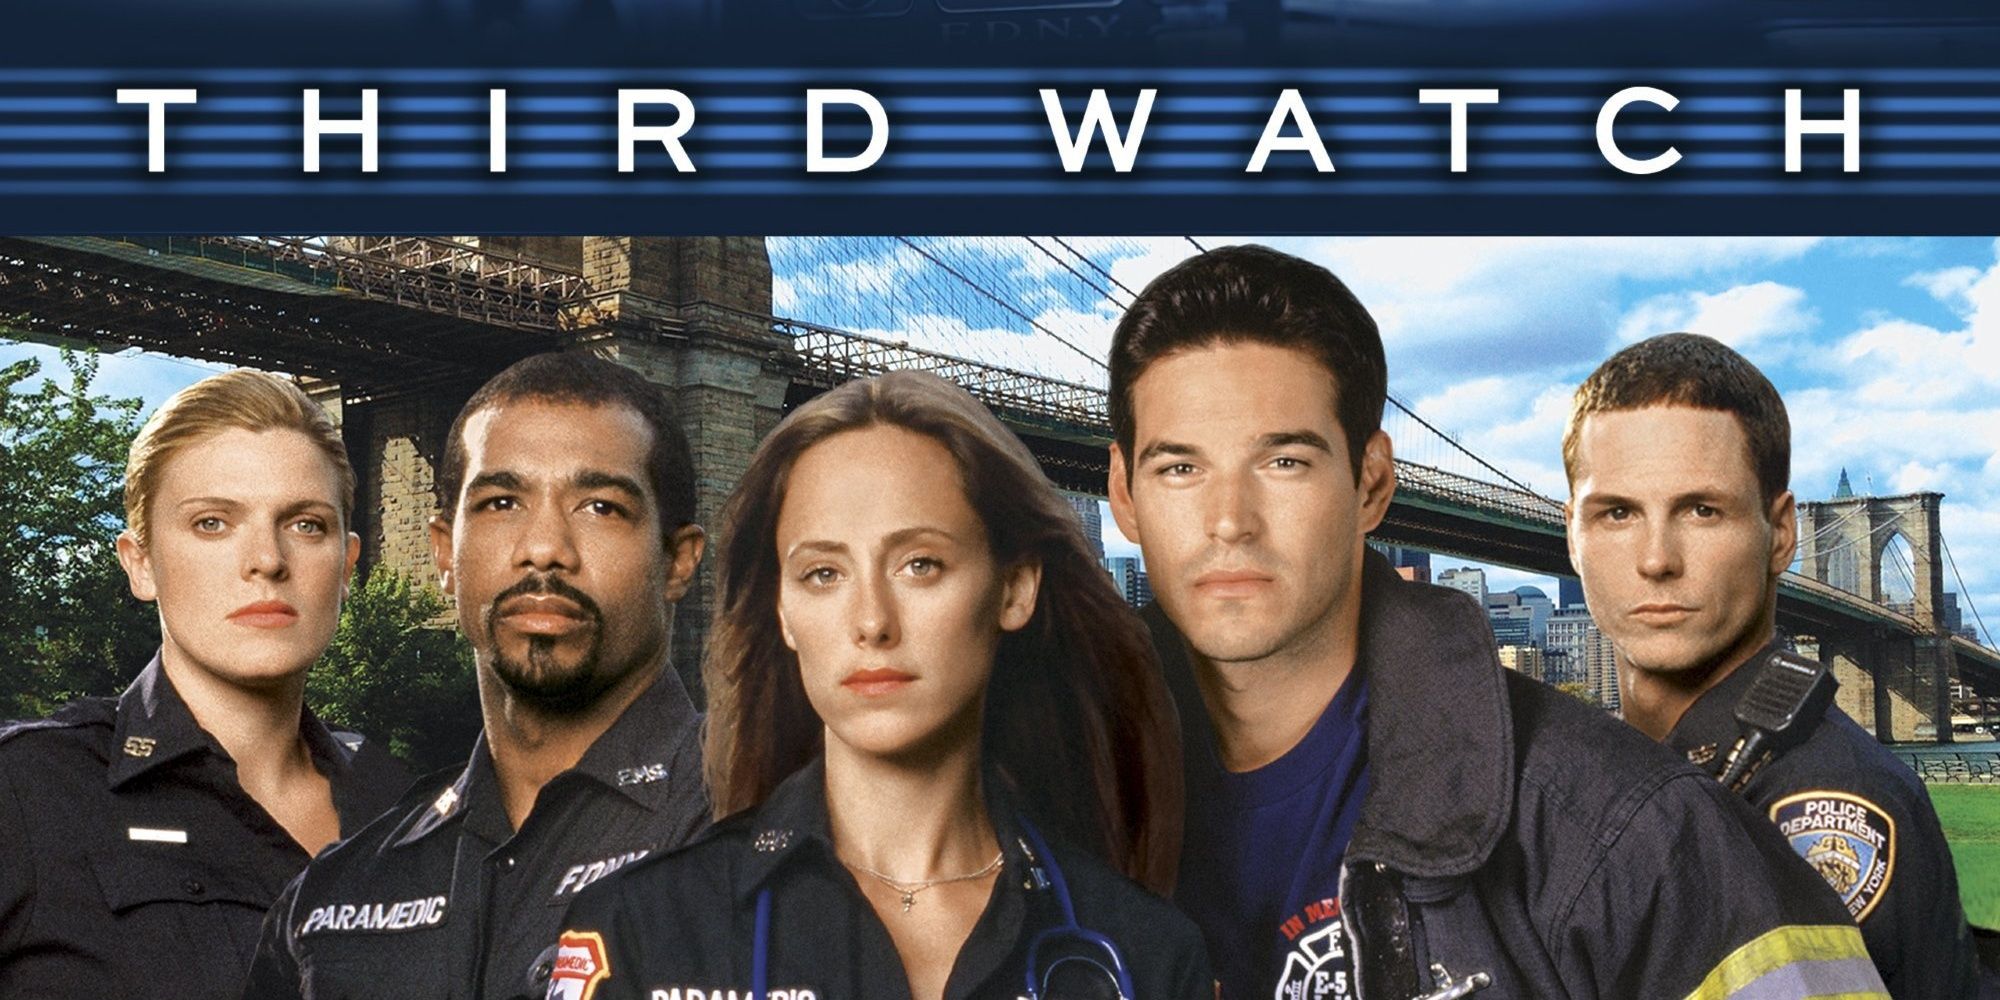 The main cast of the drama Third Watch